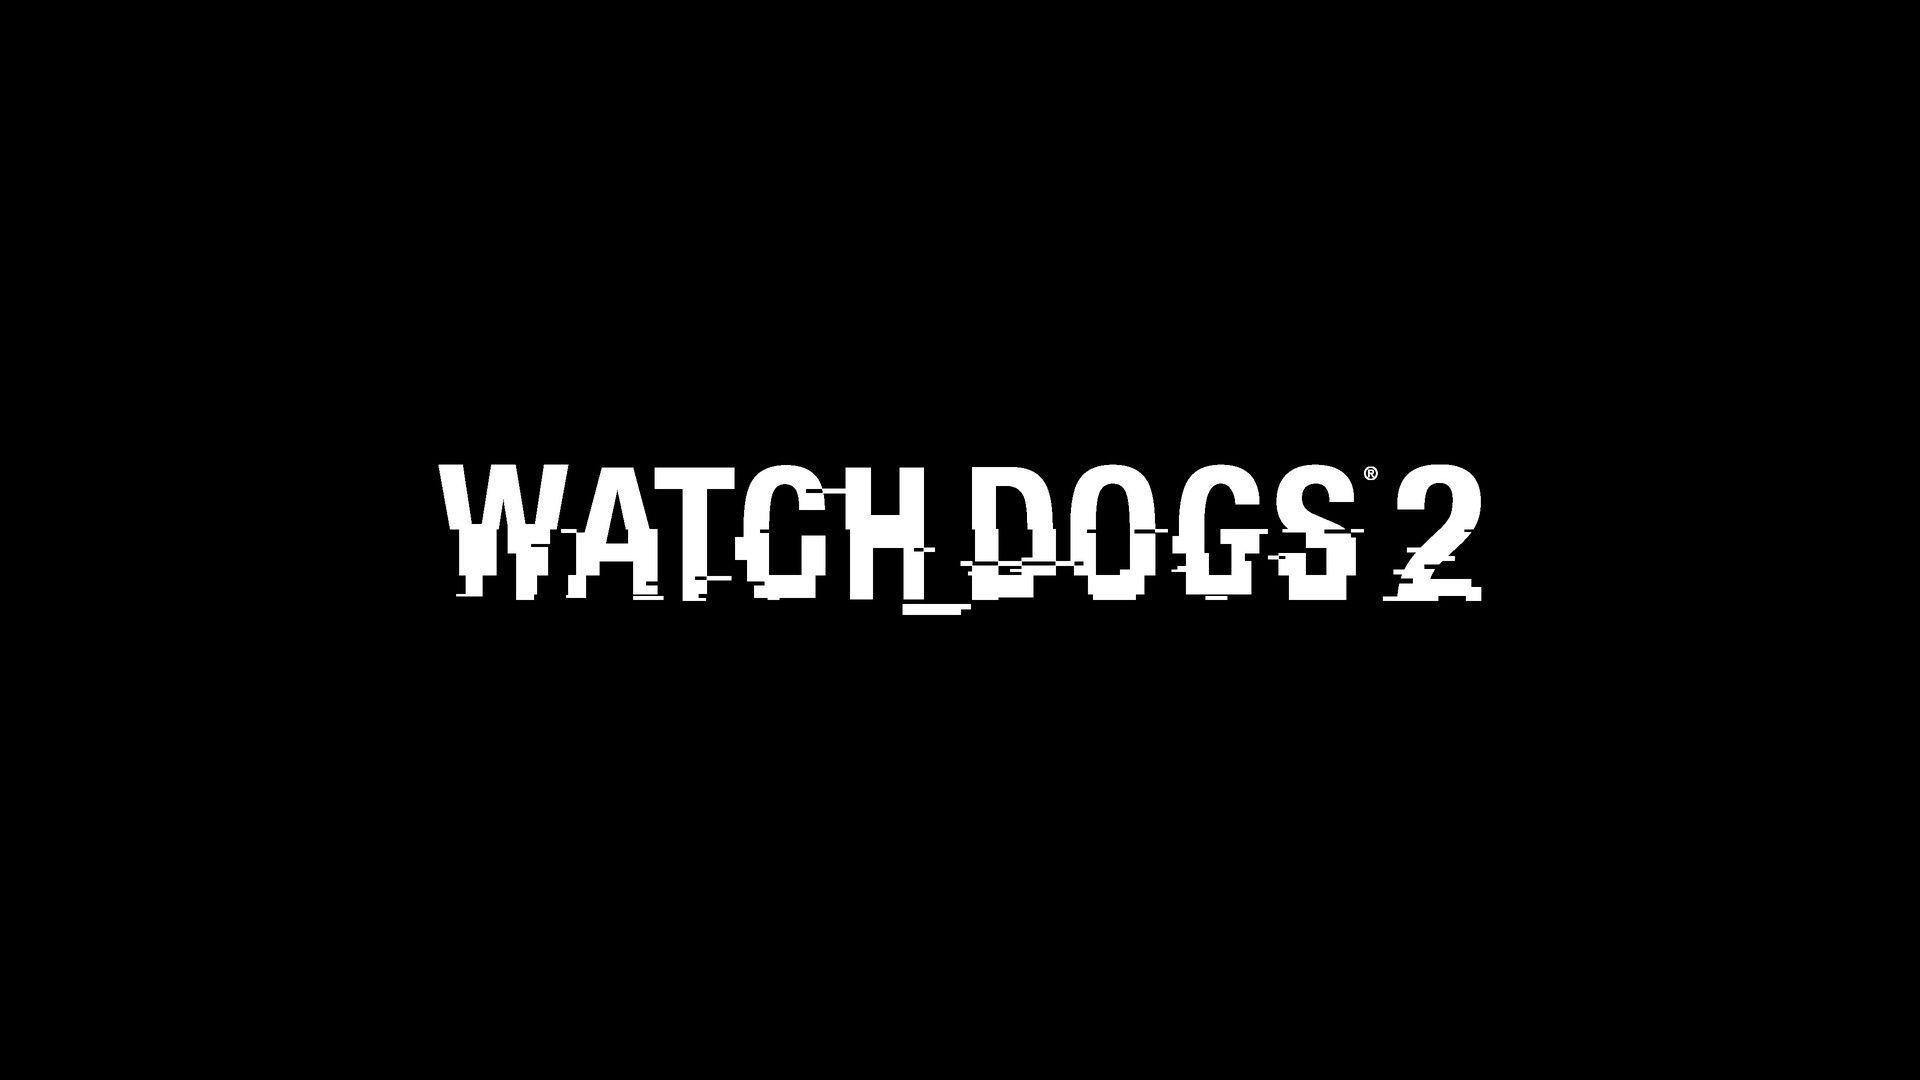 Watch Dogs 2 Full HD Wallpaper and Background Imagex1080